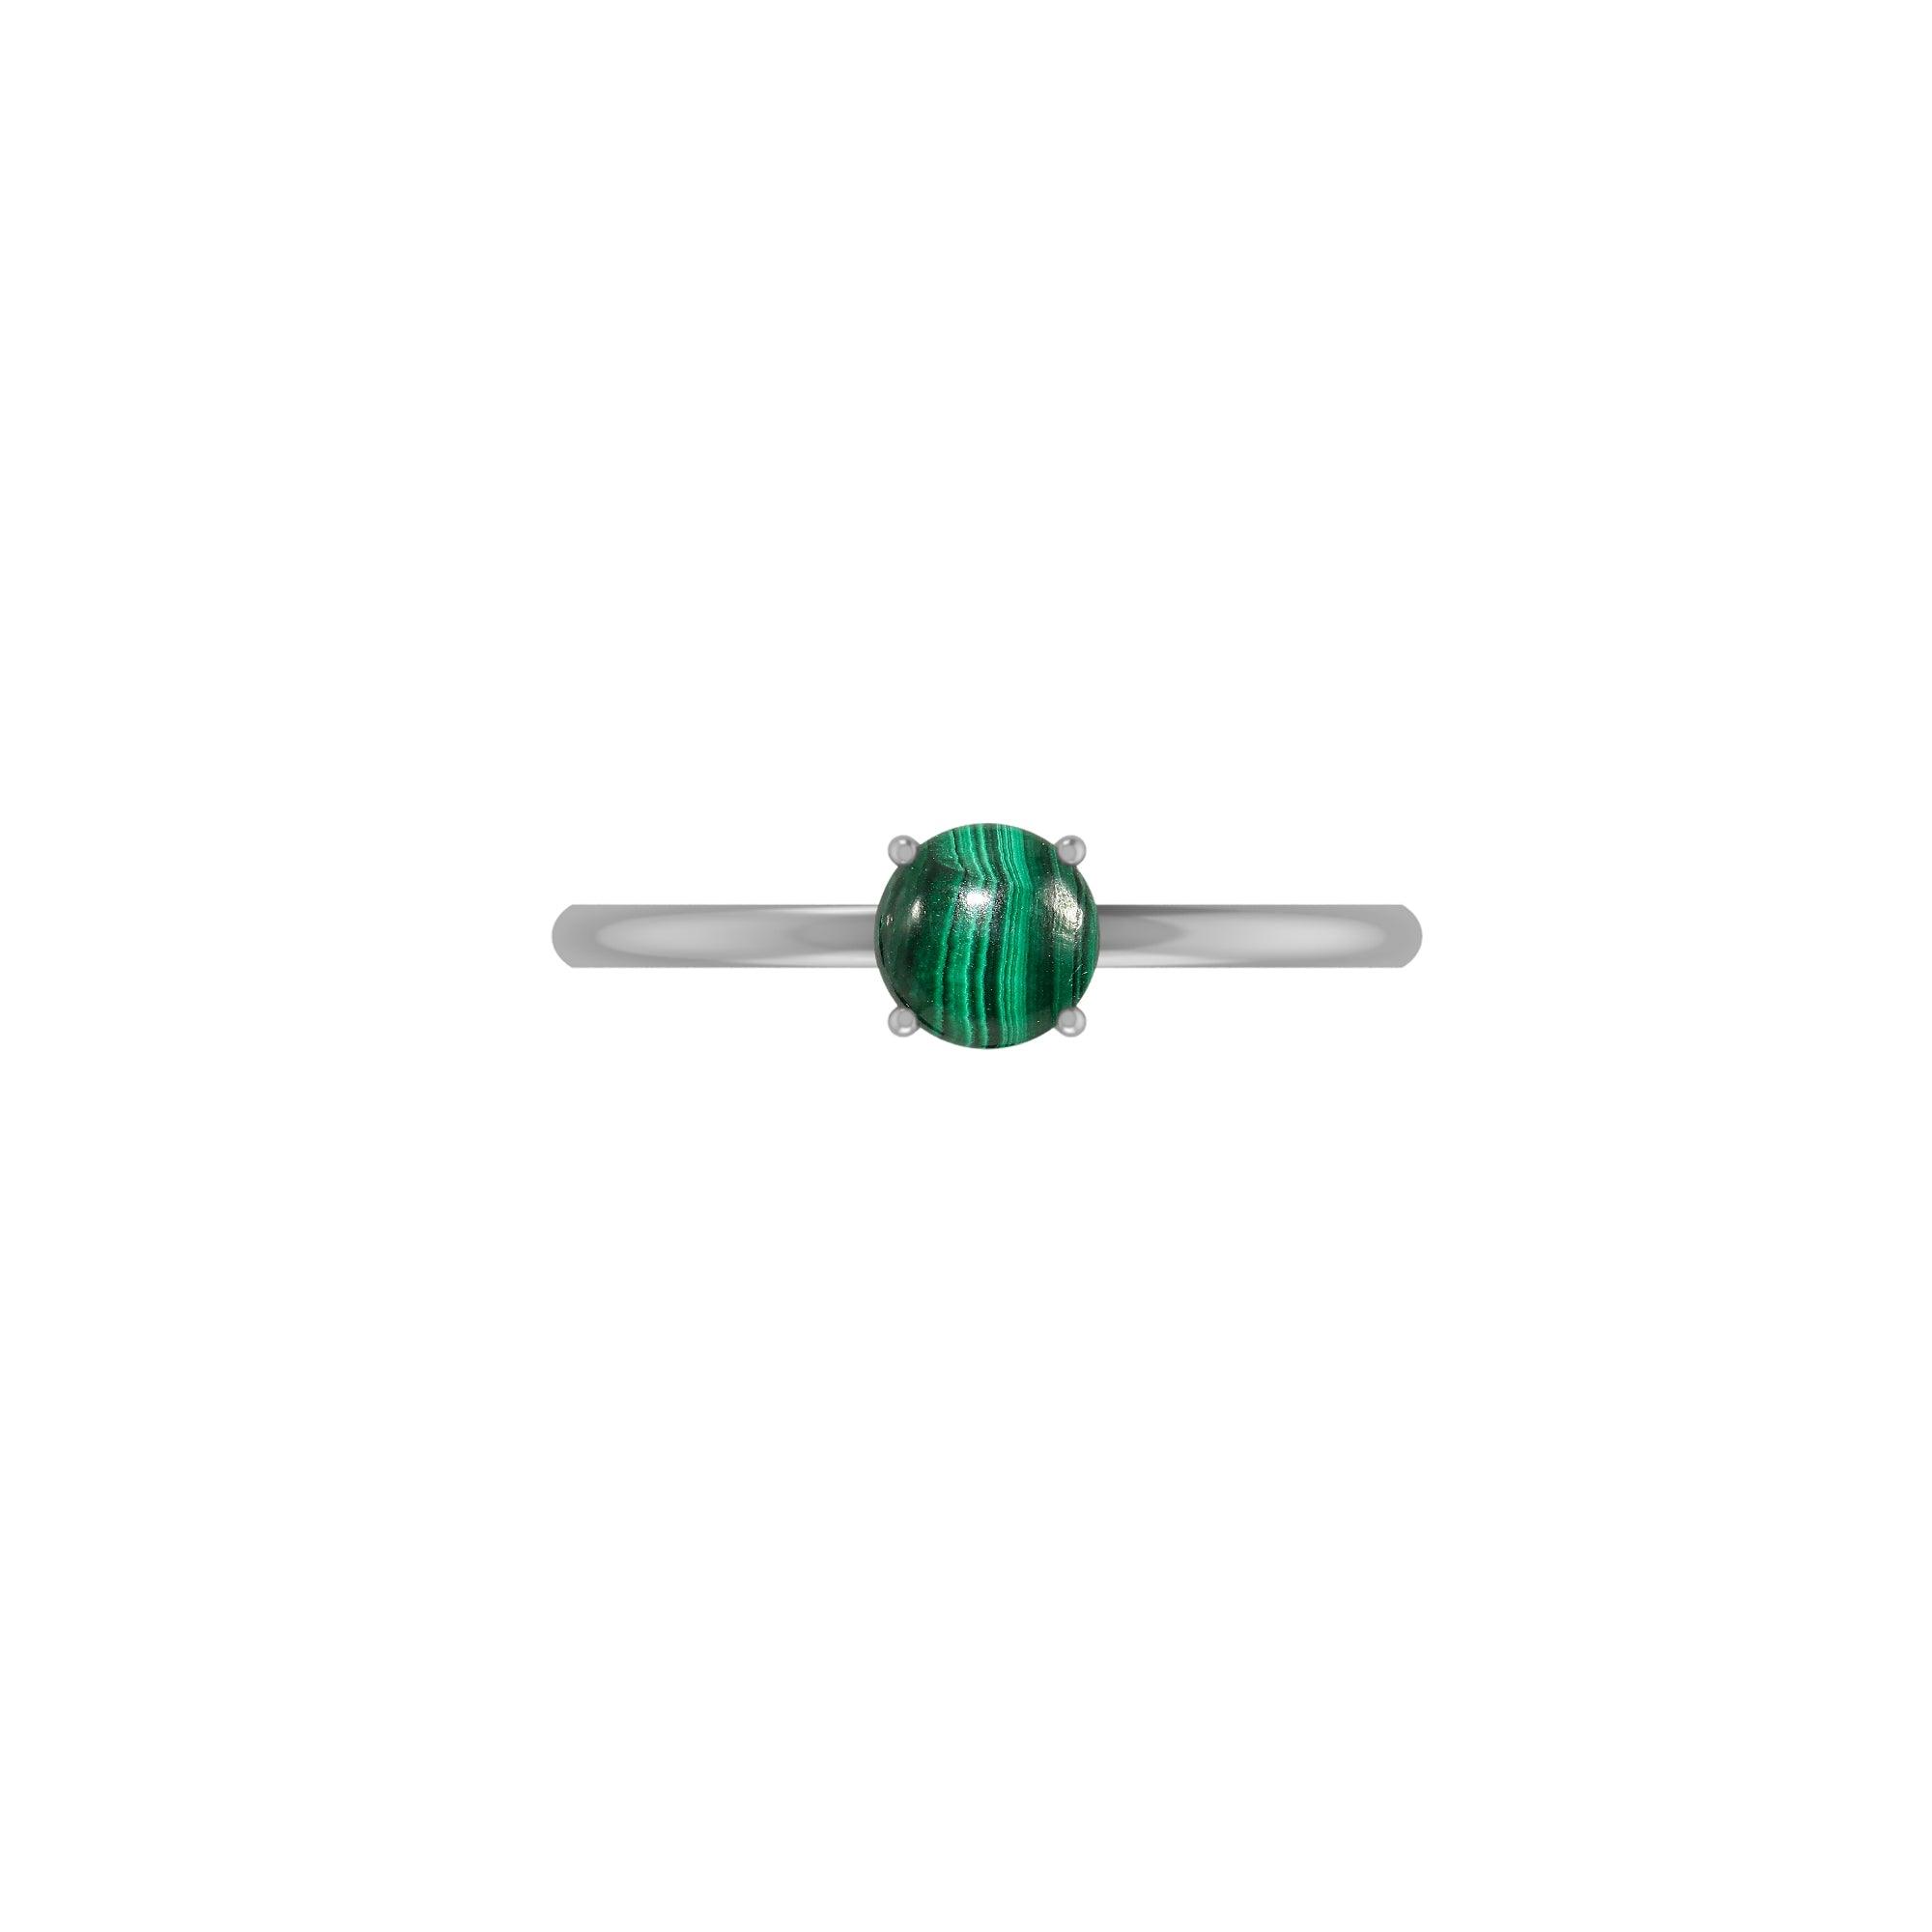 925 Sterling Silver Natural Malachite Stackable Ring Prong Set Jewelry Pack of 12